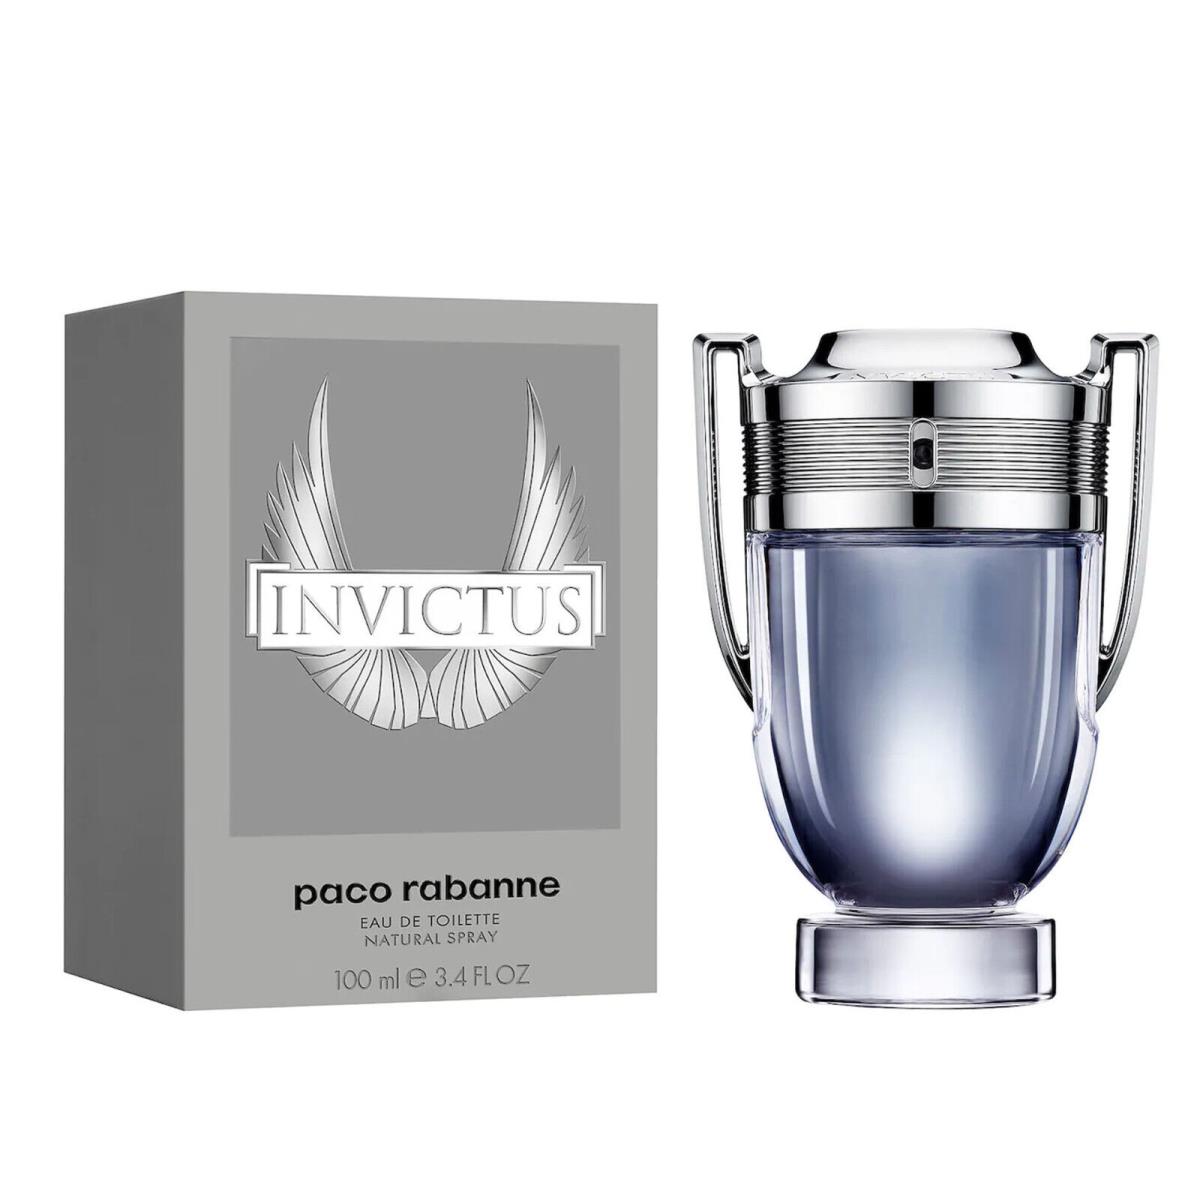 Invictus by Paco Rabanne 3.4 oz / 100 ml Edt Cologne